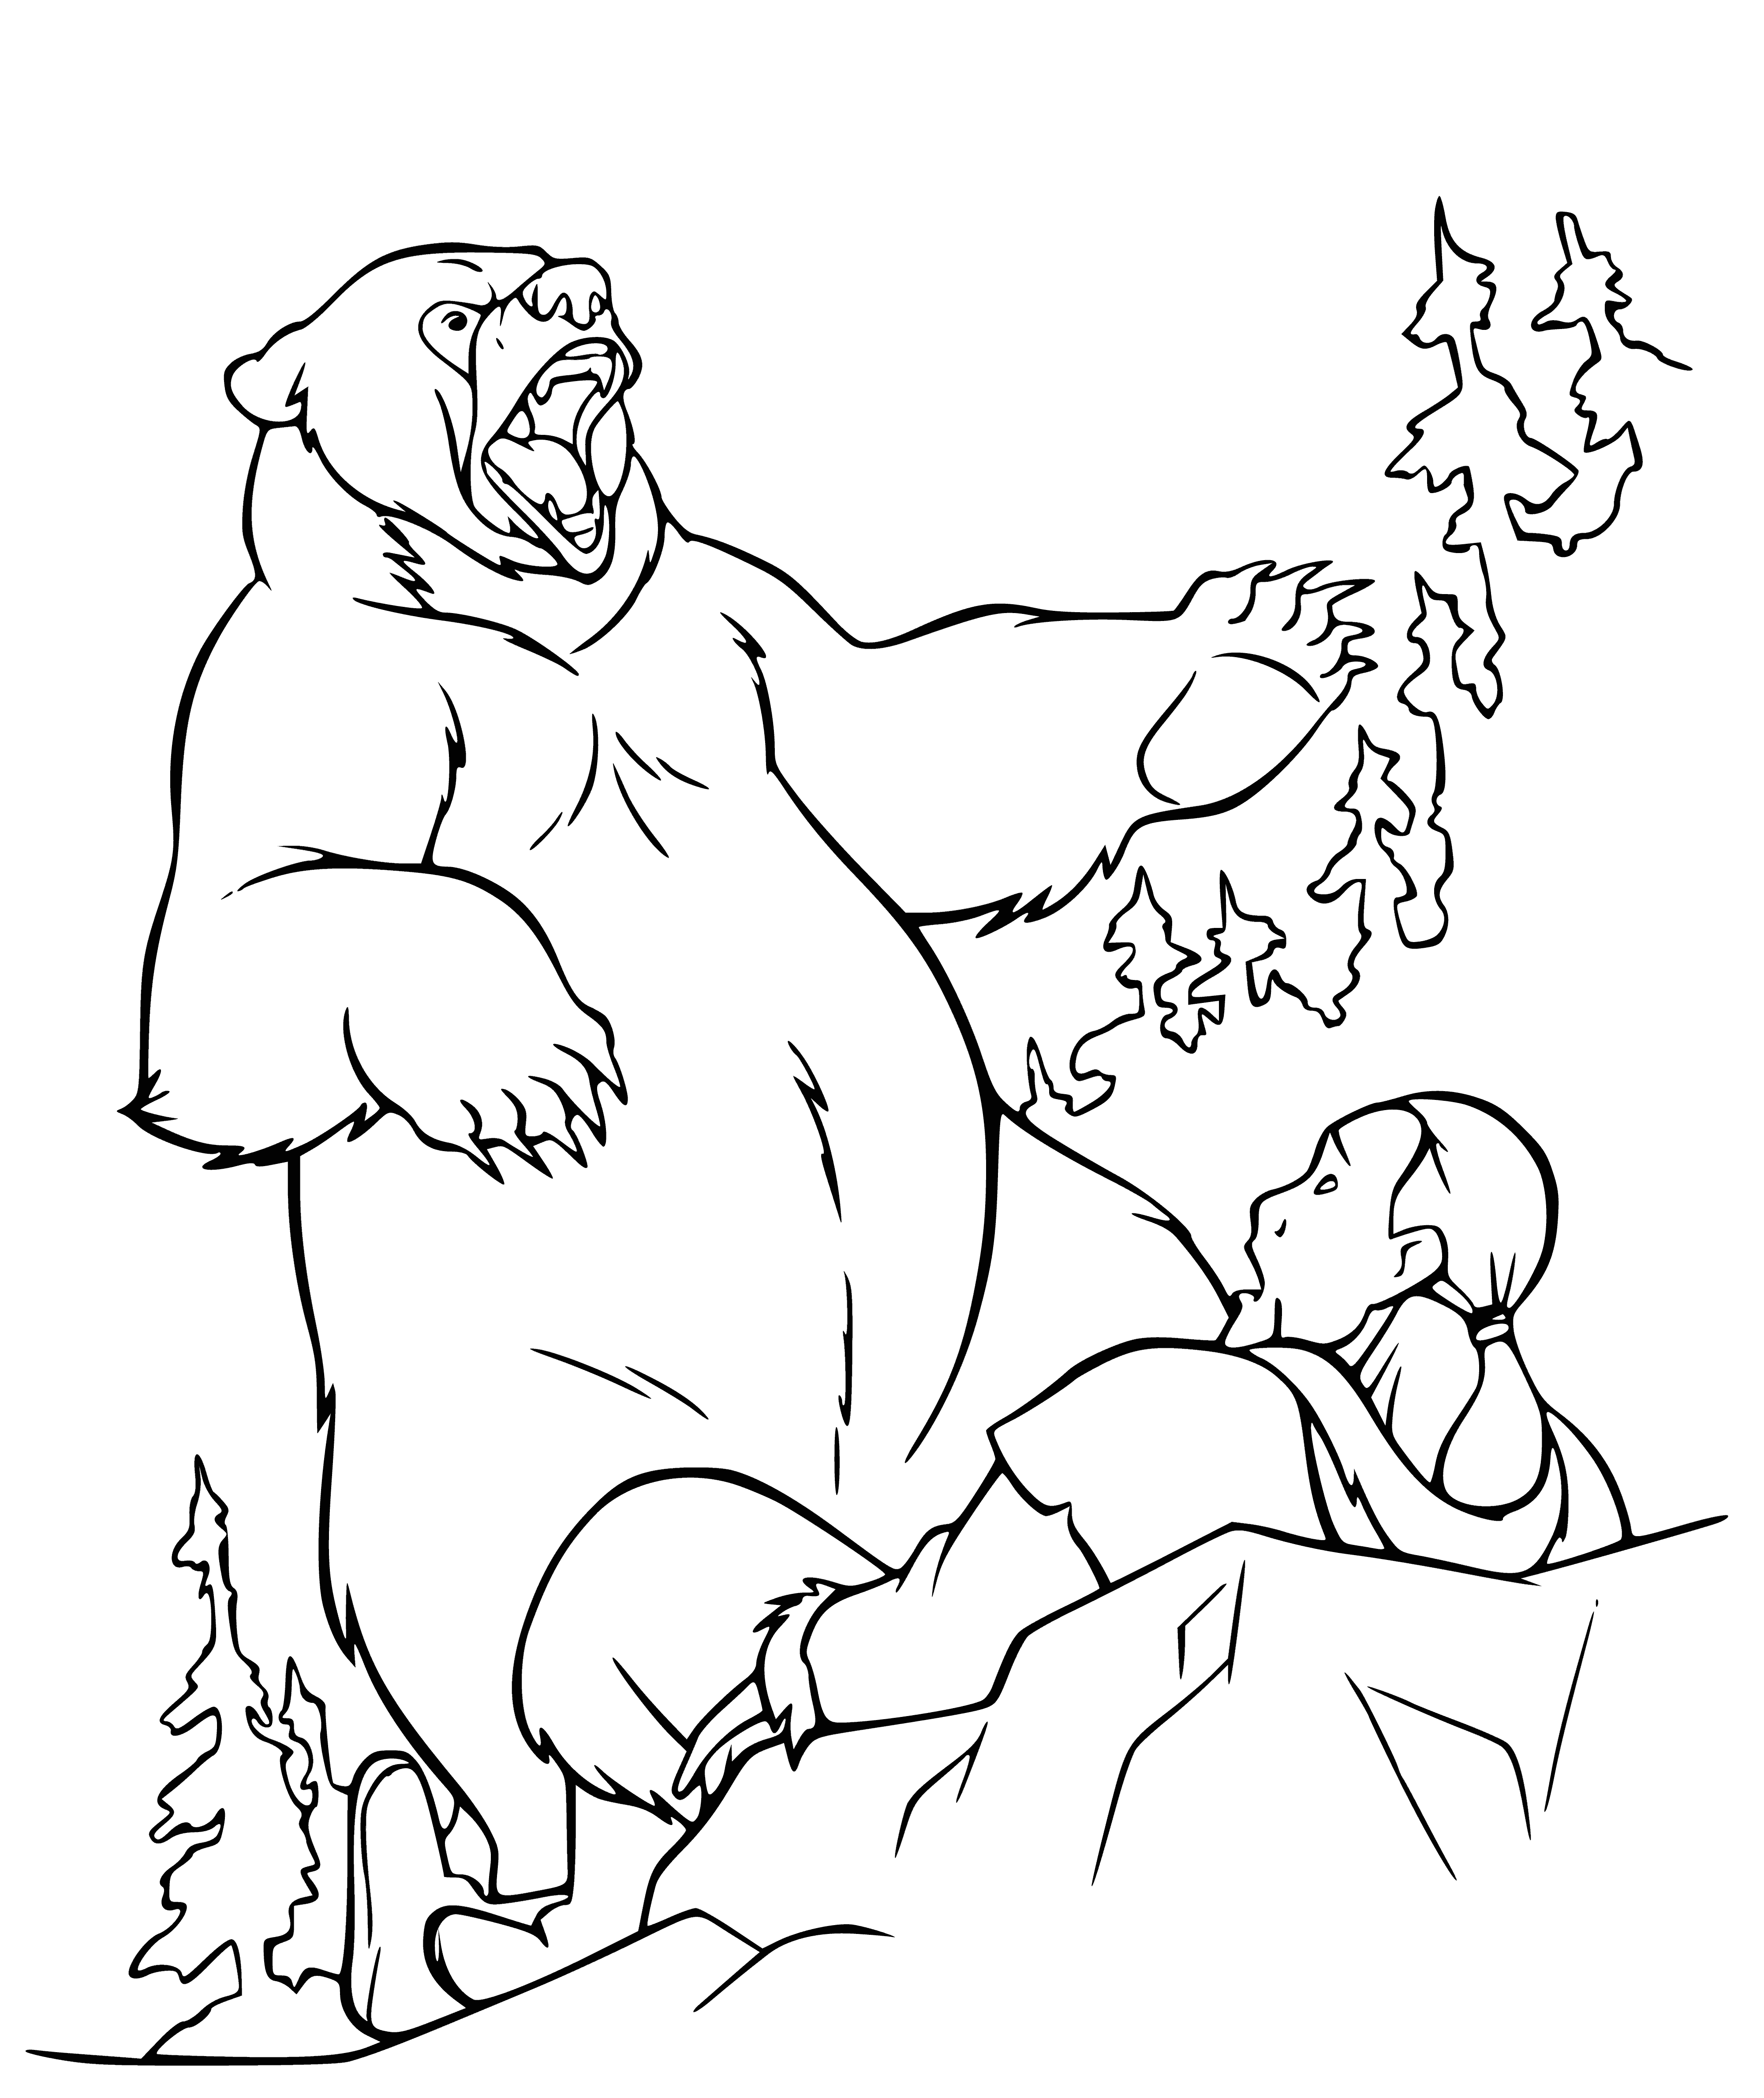 The bear attacks coloring page